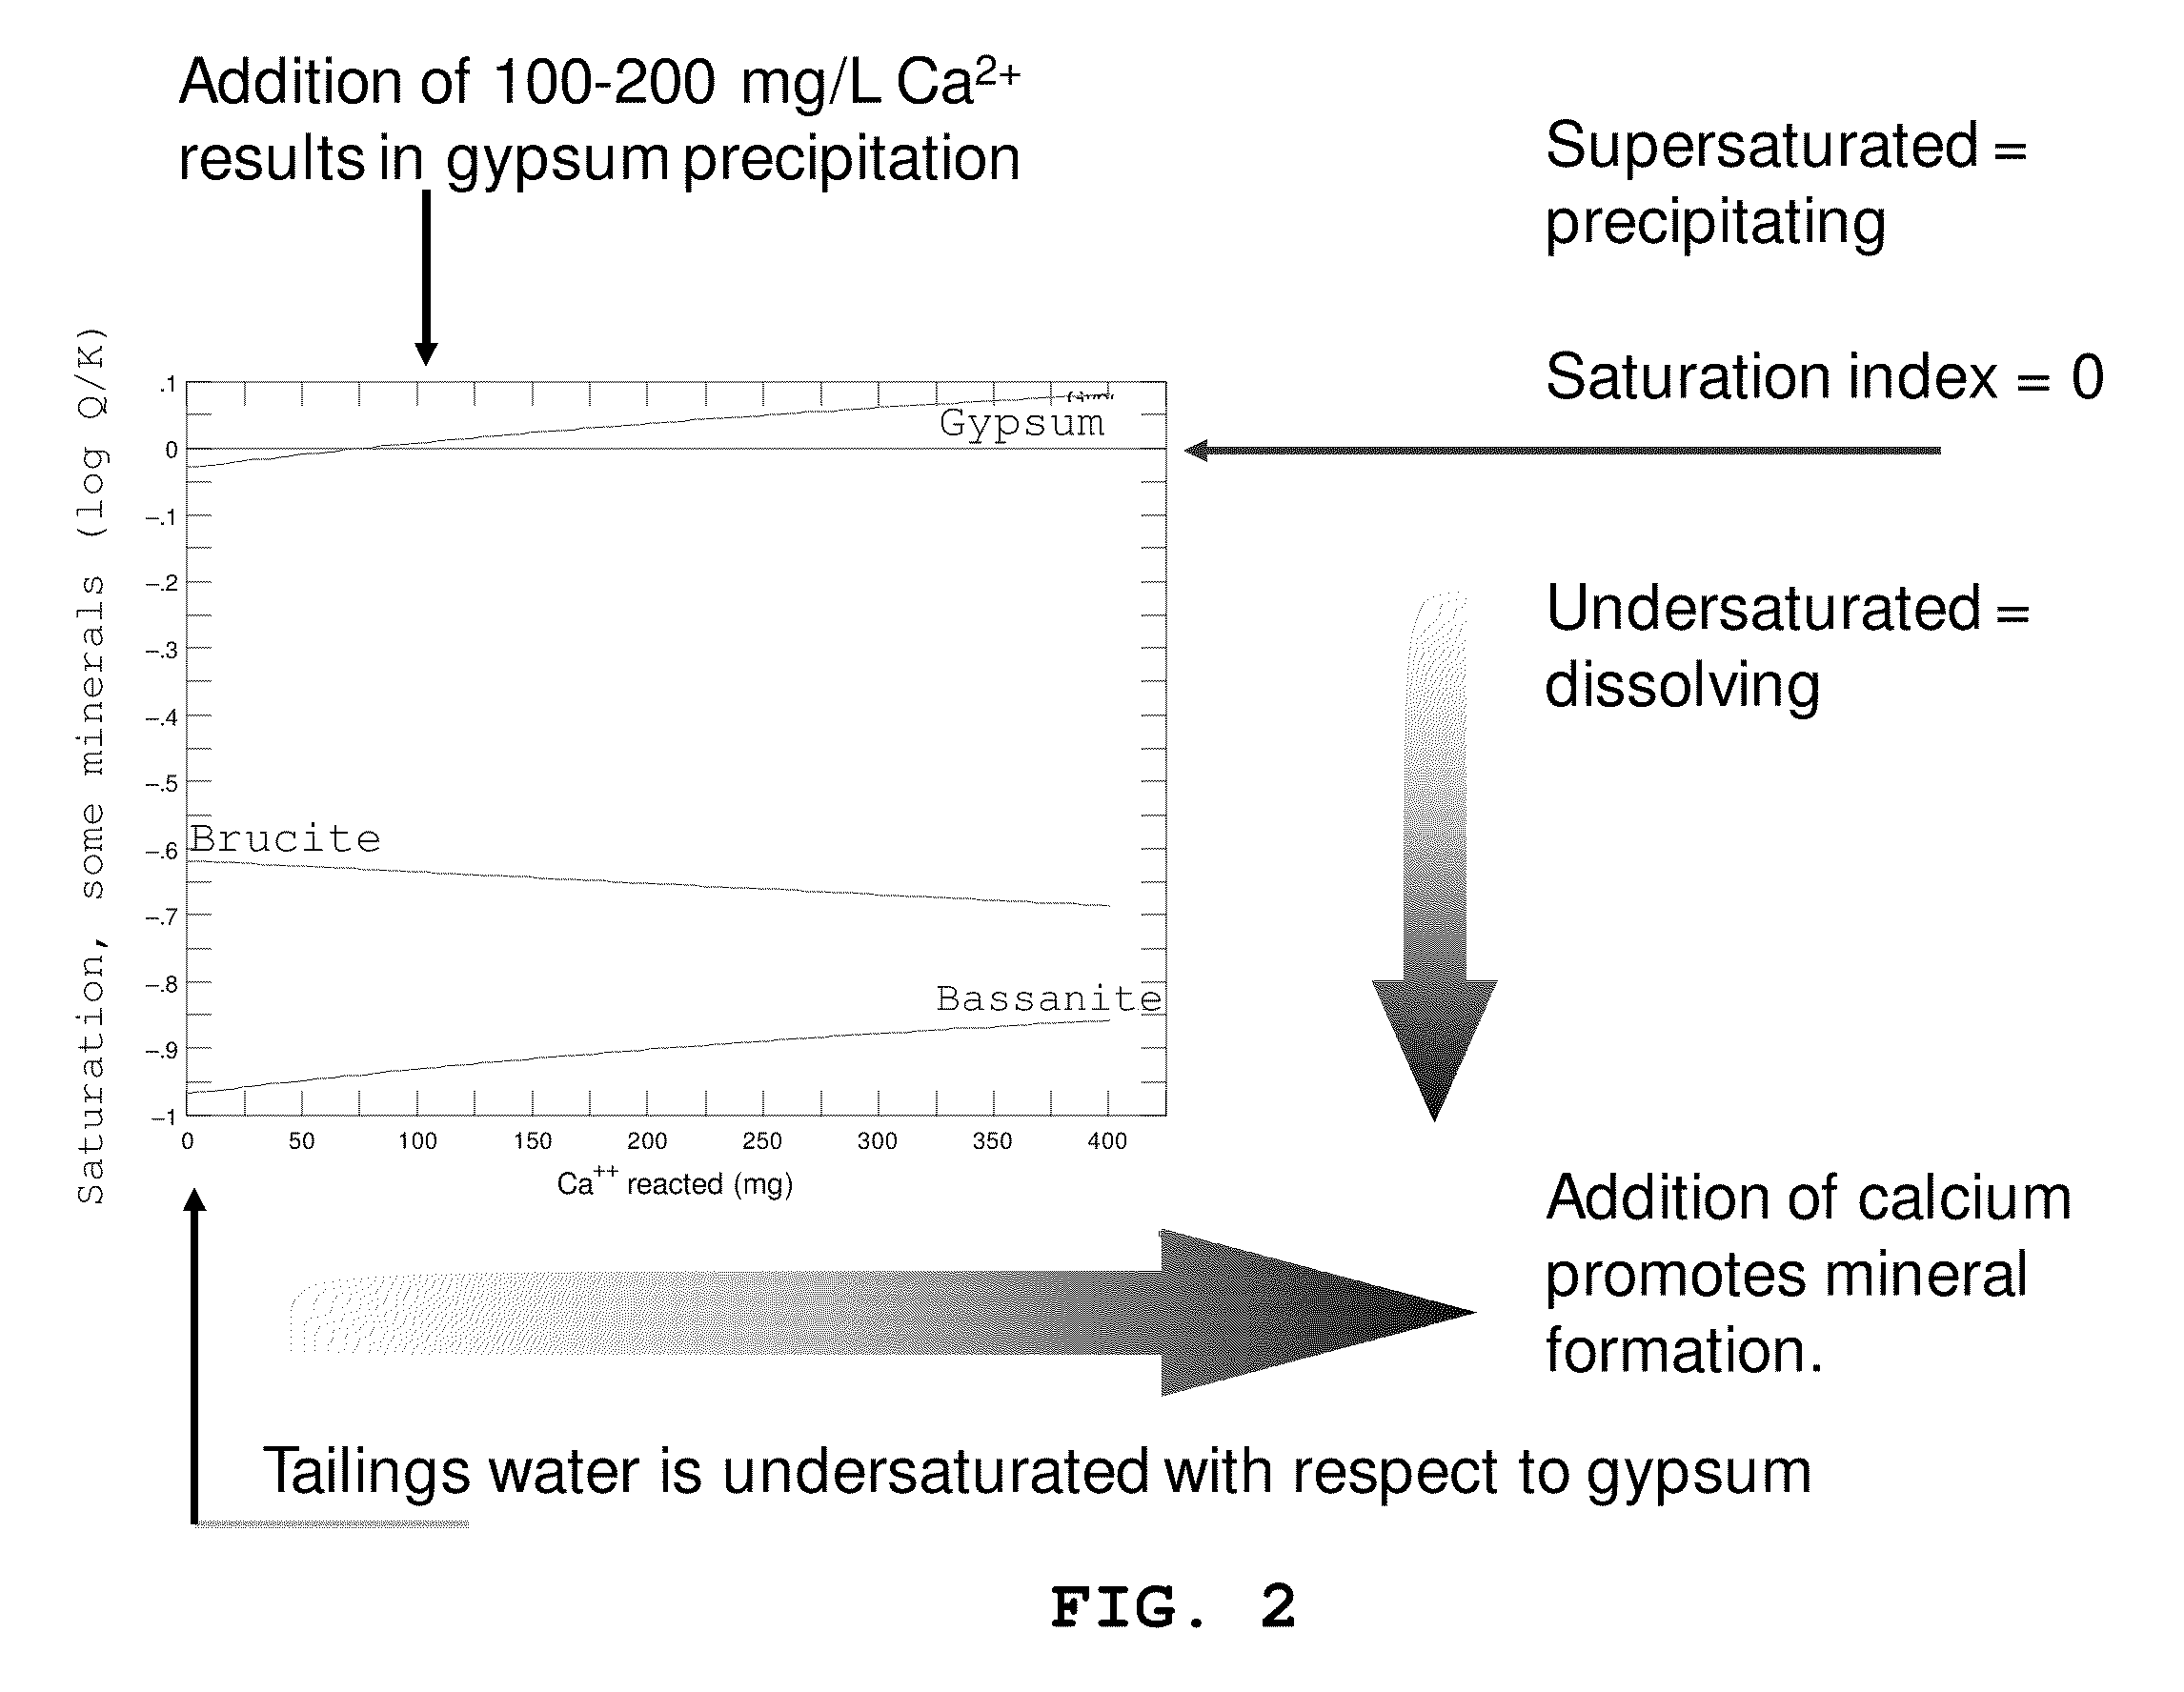 Mineral hardpan formation for stabilization of acid- and sulfate-generating tailings